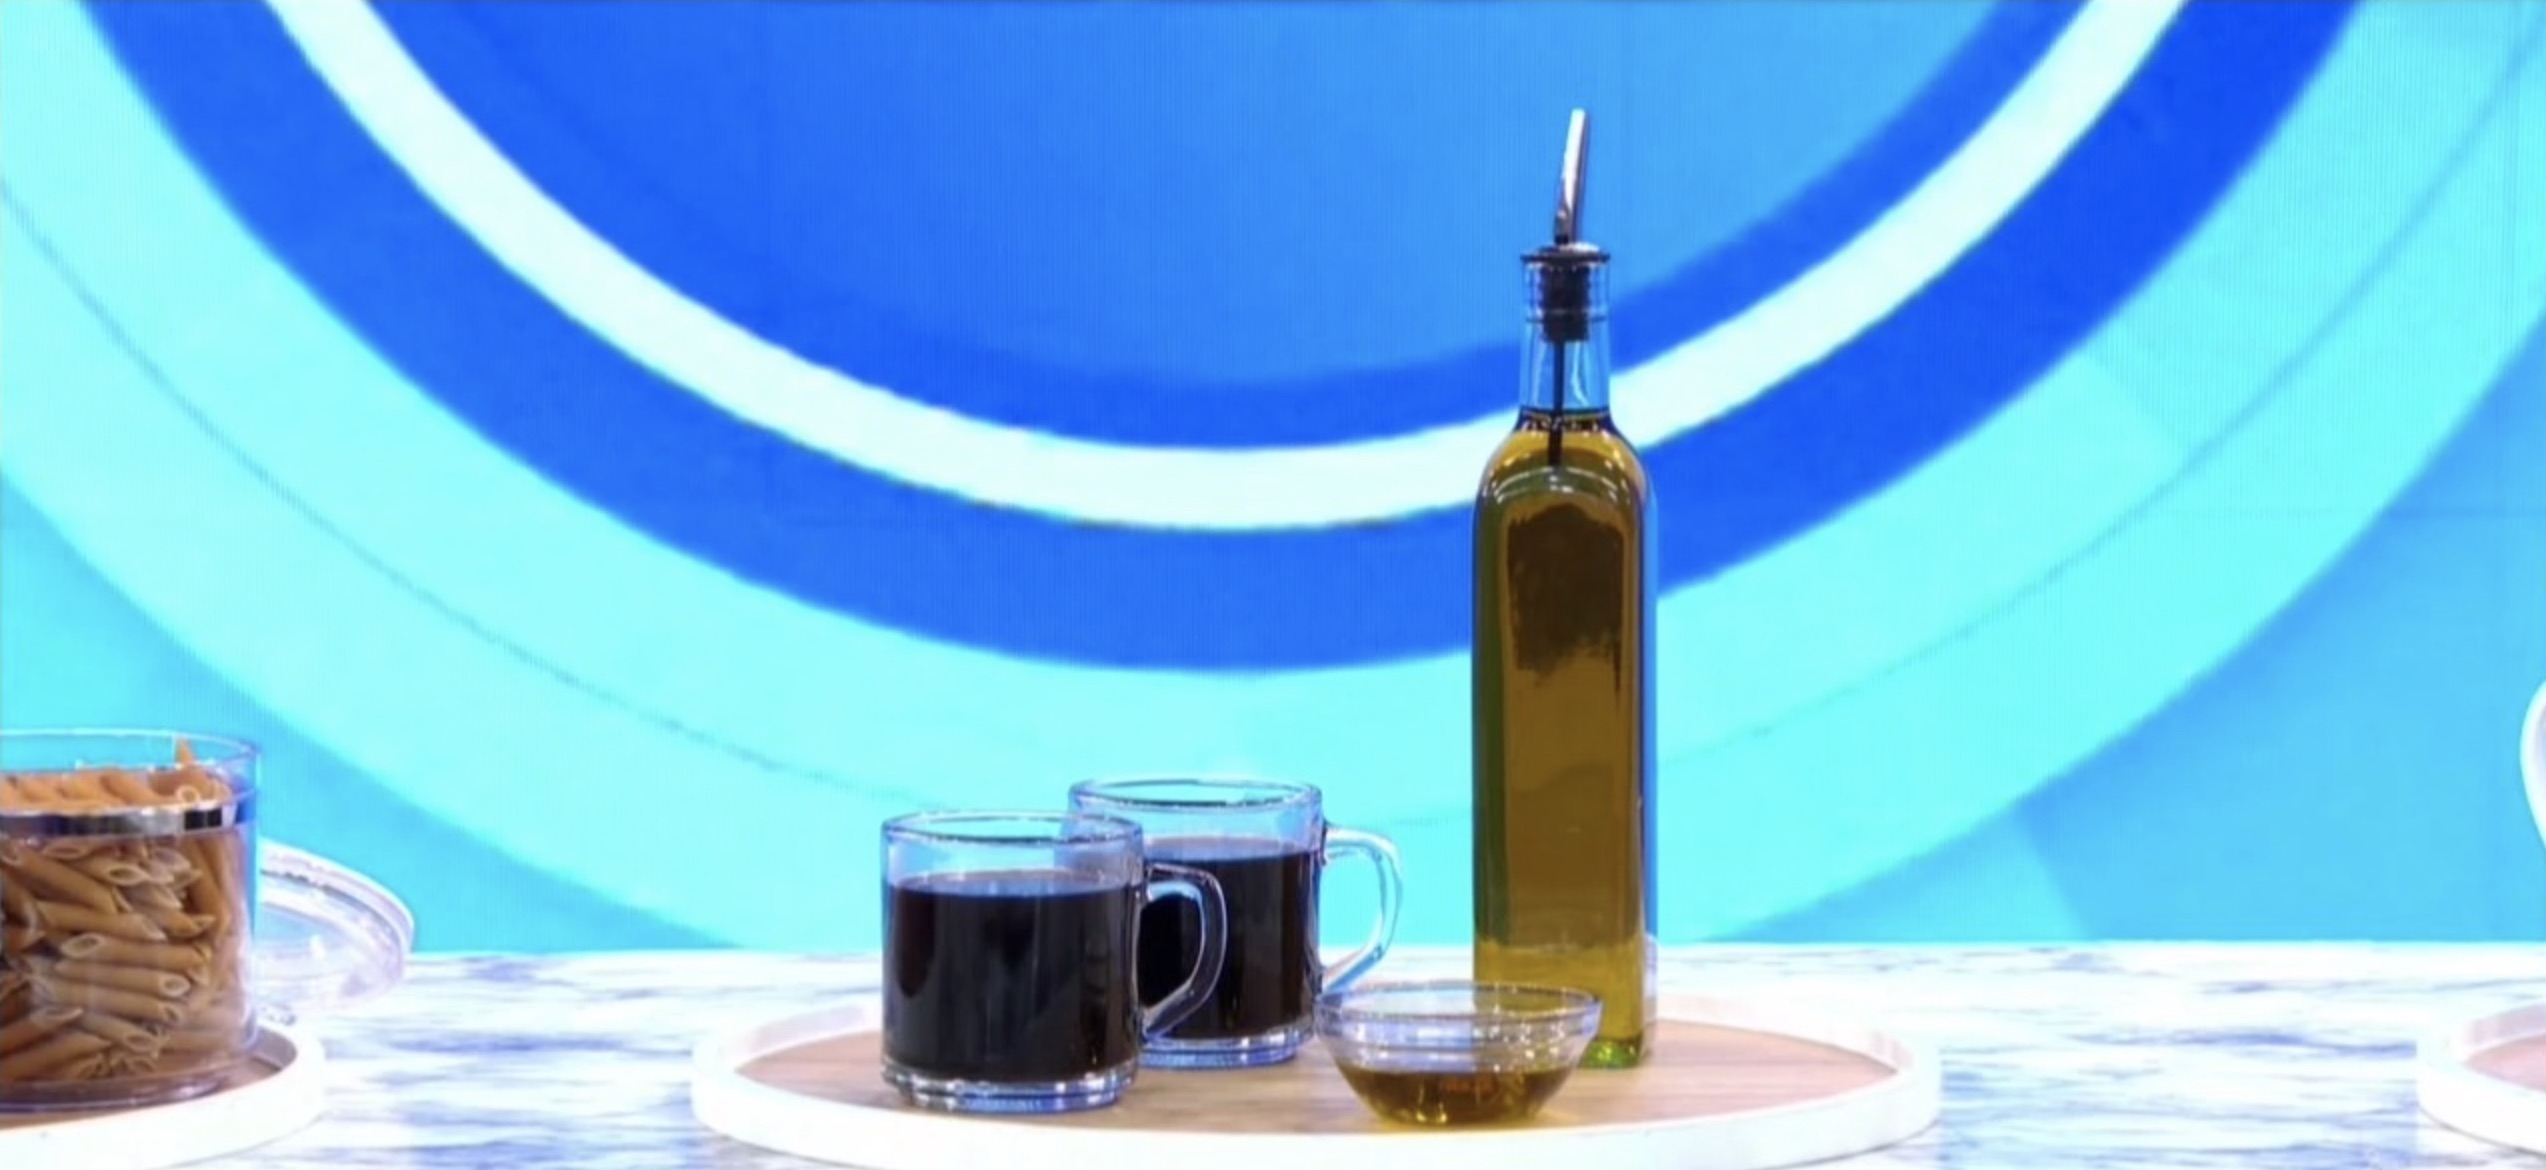 PHOTO: Cups of black coffee with extra virgin olive oil.